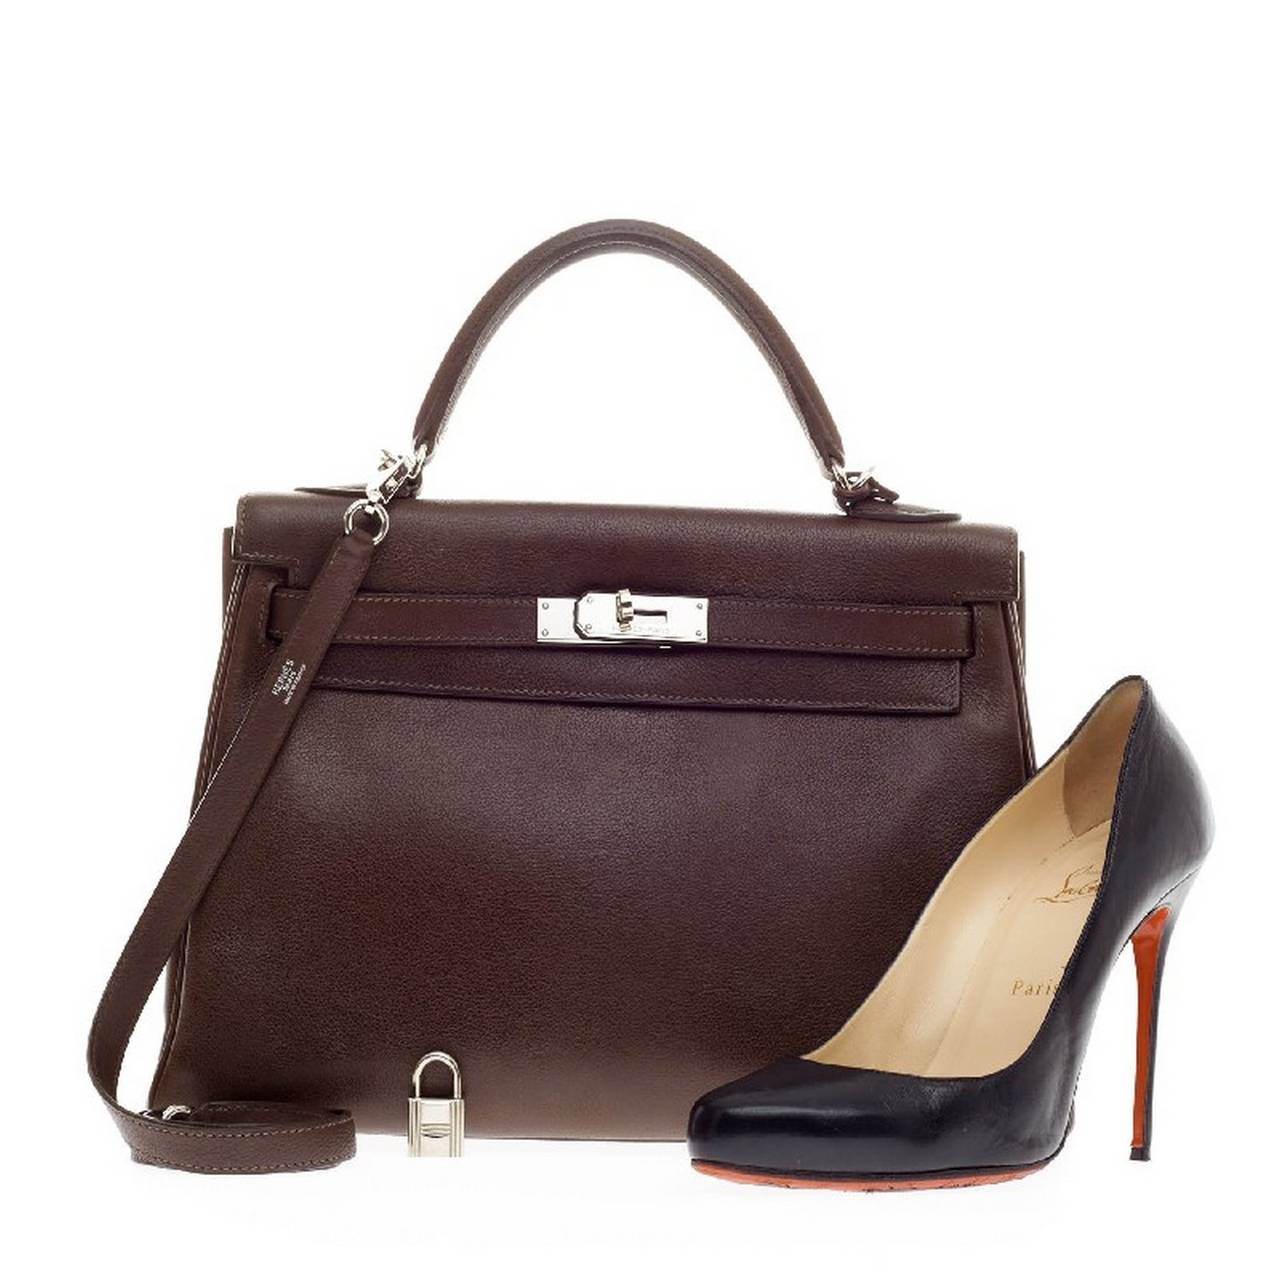 This authentic Hermes Kelly Havane Evergrain with Palladium Hardware 32 is as classic and timeless as they come. Designed in rich brown Havane evergrain leather and accented with polished palladium hardware, this Kelly showcases Hermes' beautiful